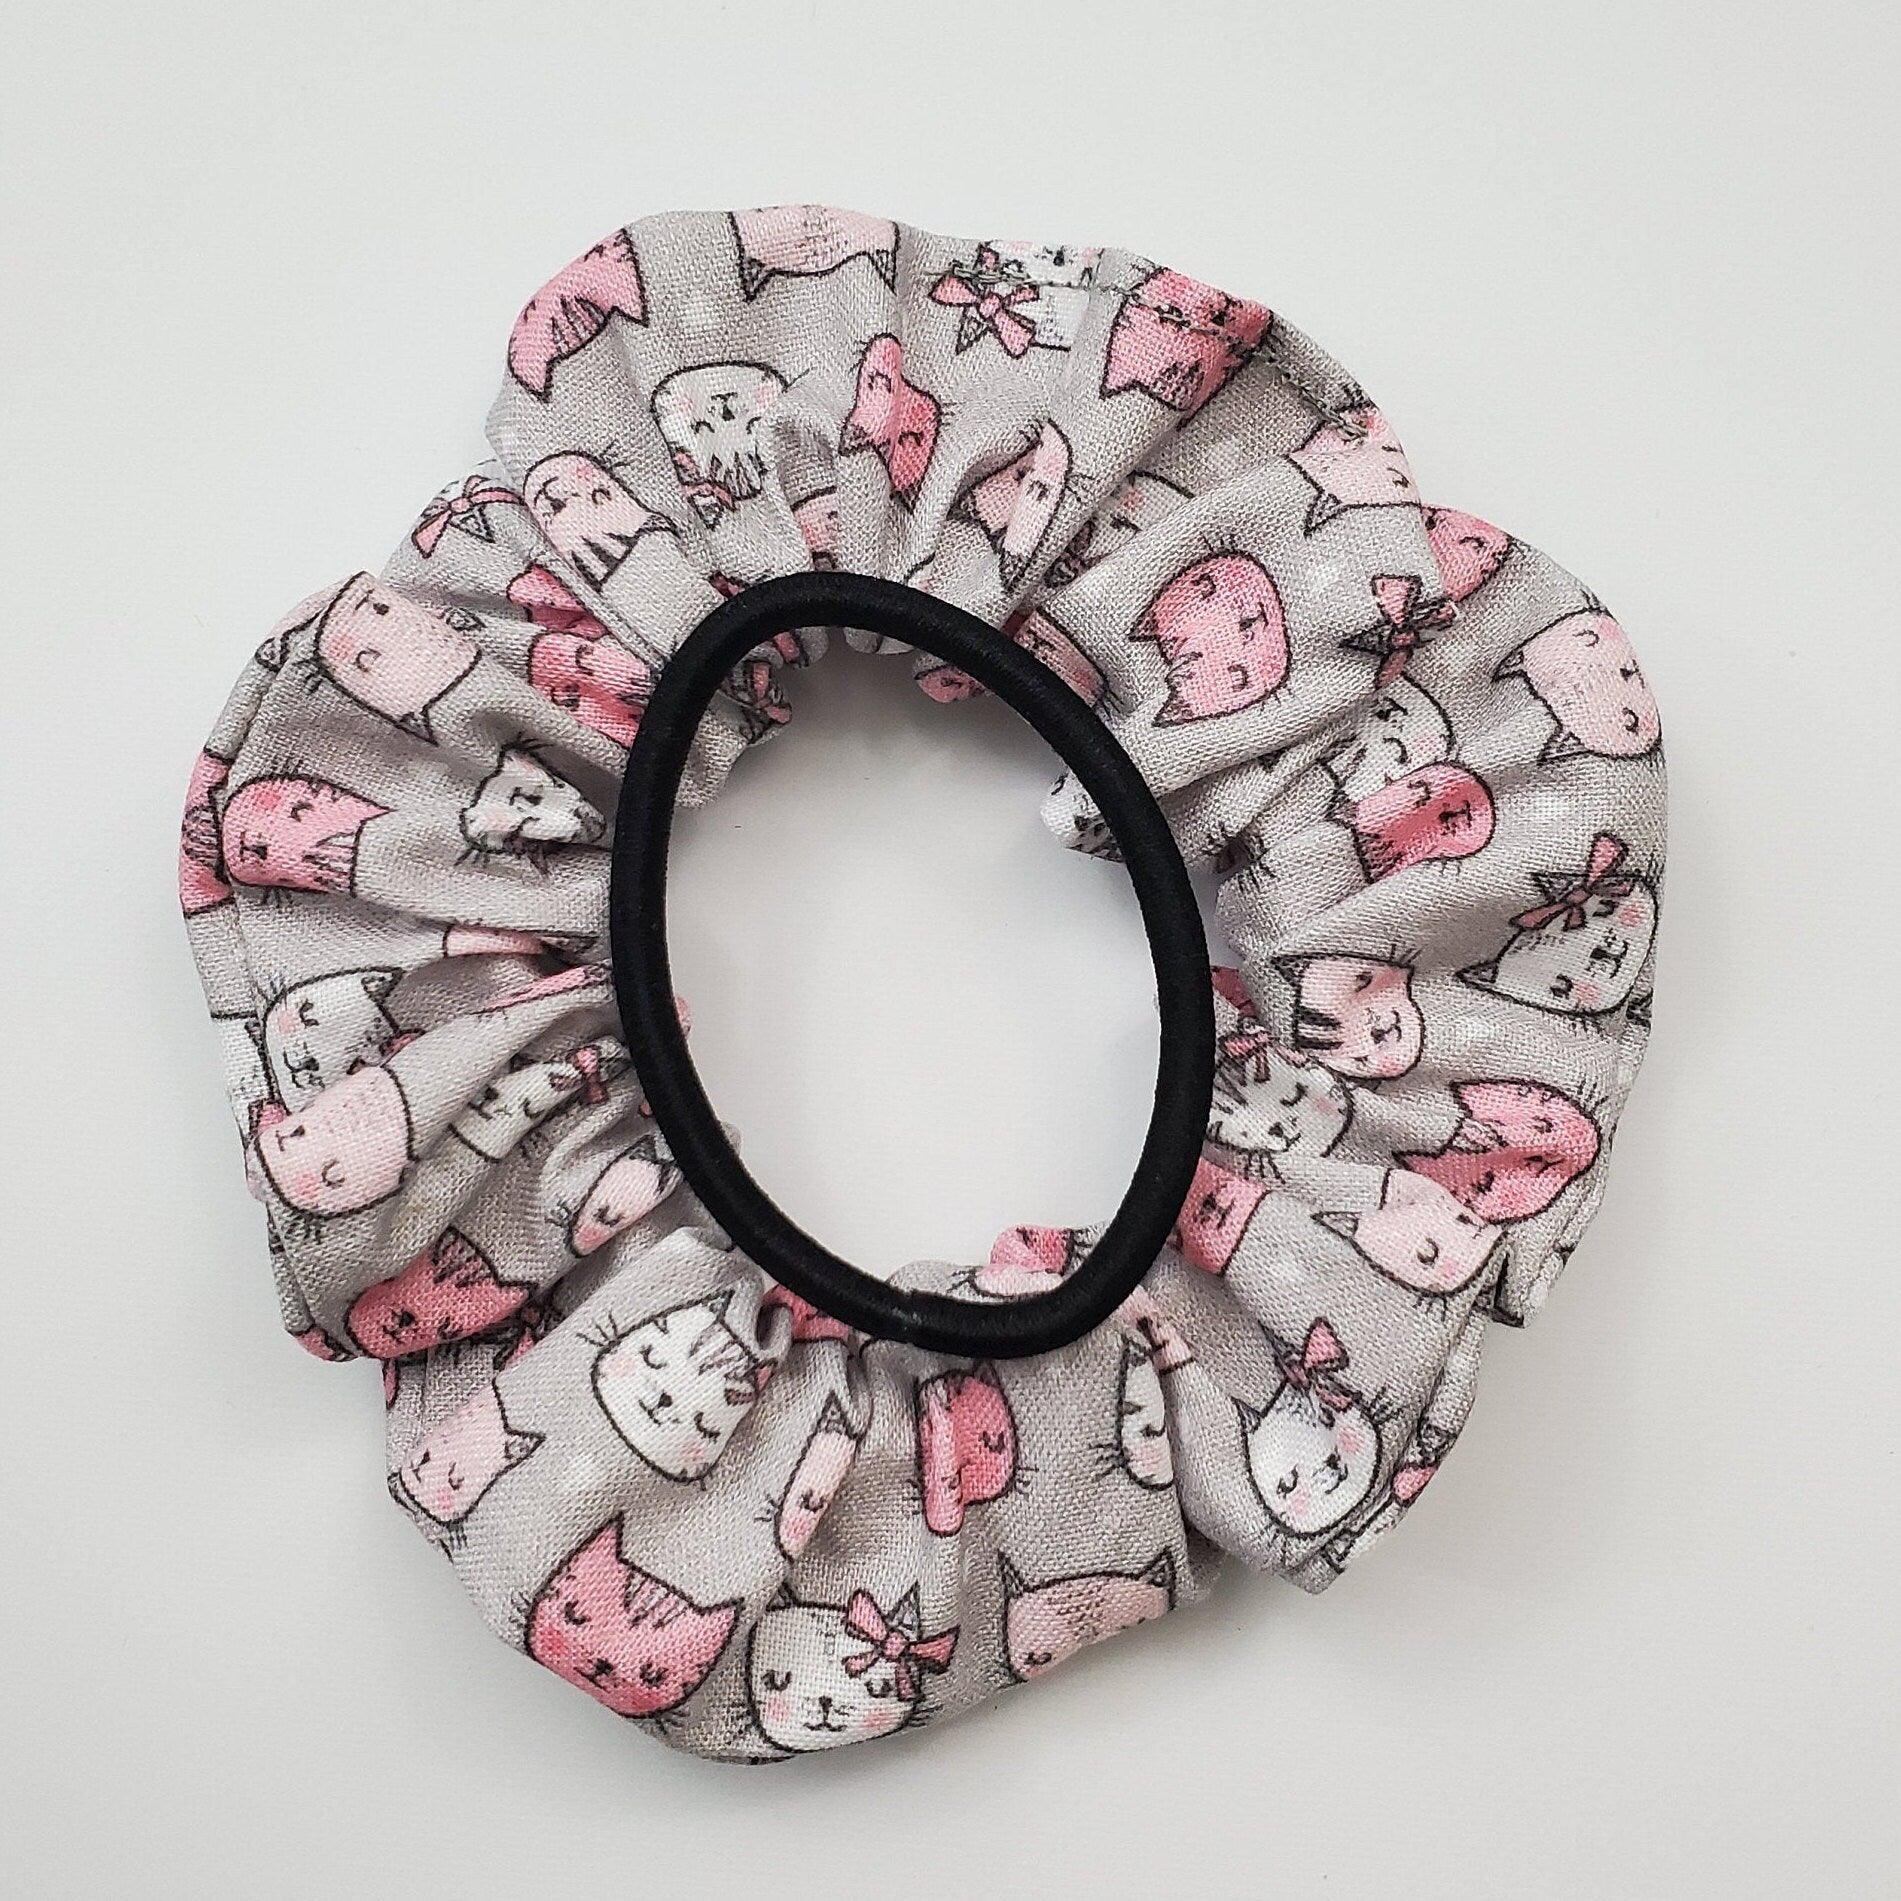 Grey and pink cats scrunchie shown with a black hair tie as a size comparison.